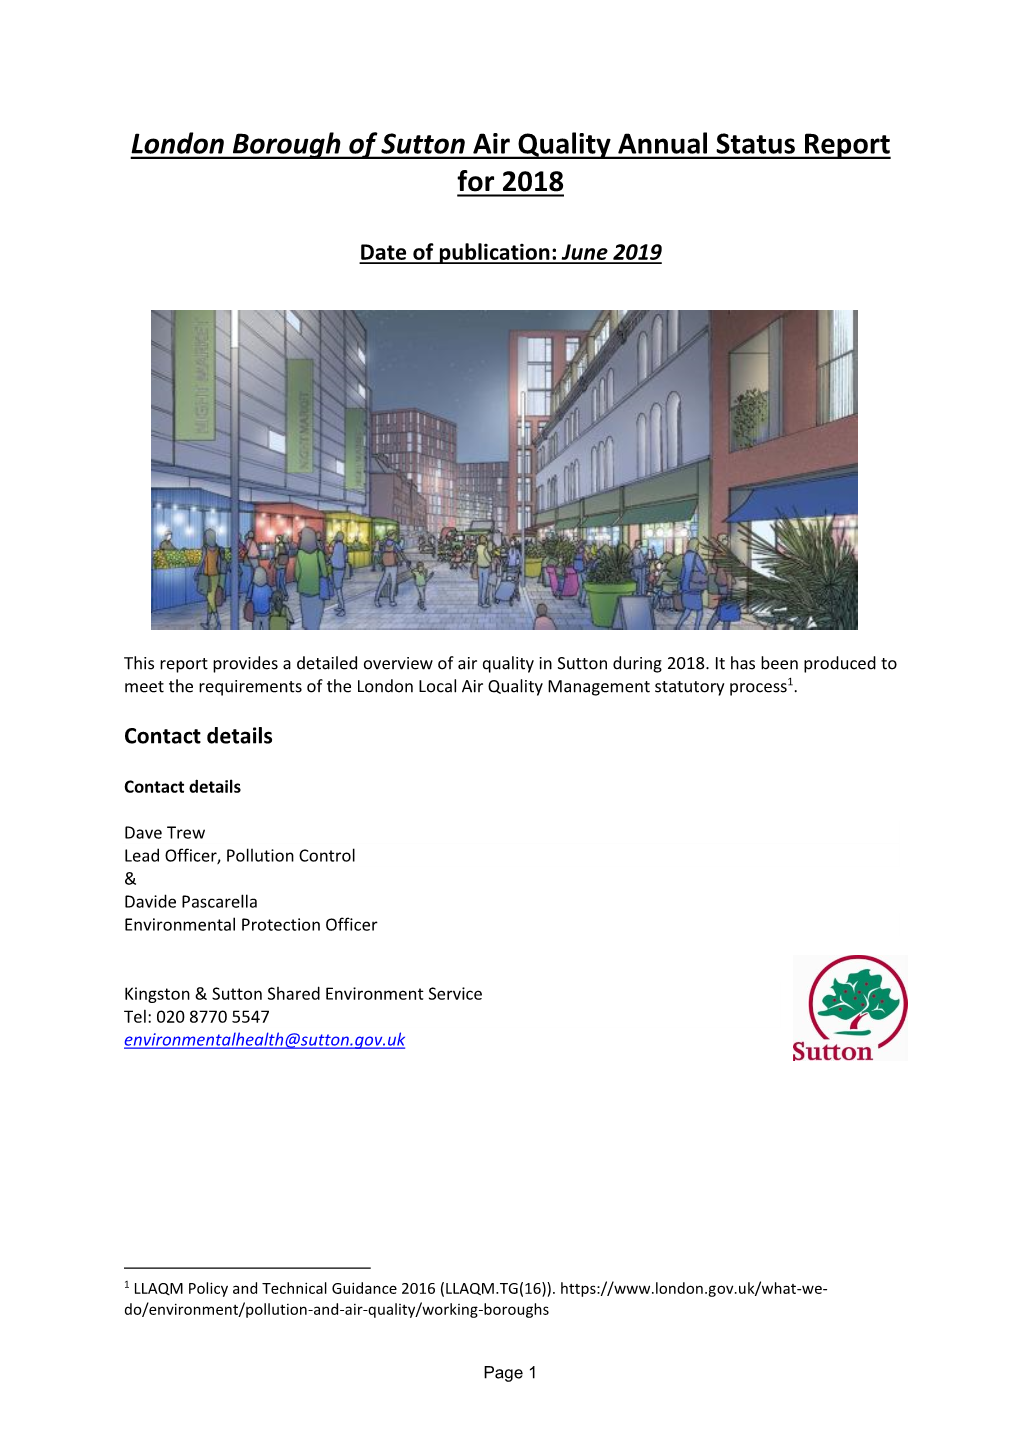 London Borough of Sutton Air Quality Annual Status Report for 2018